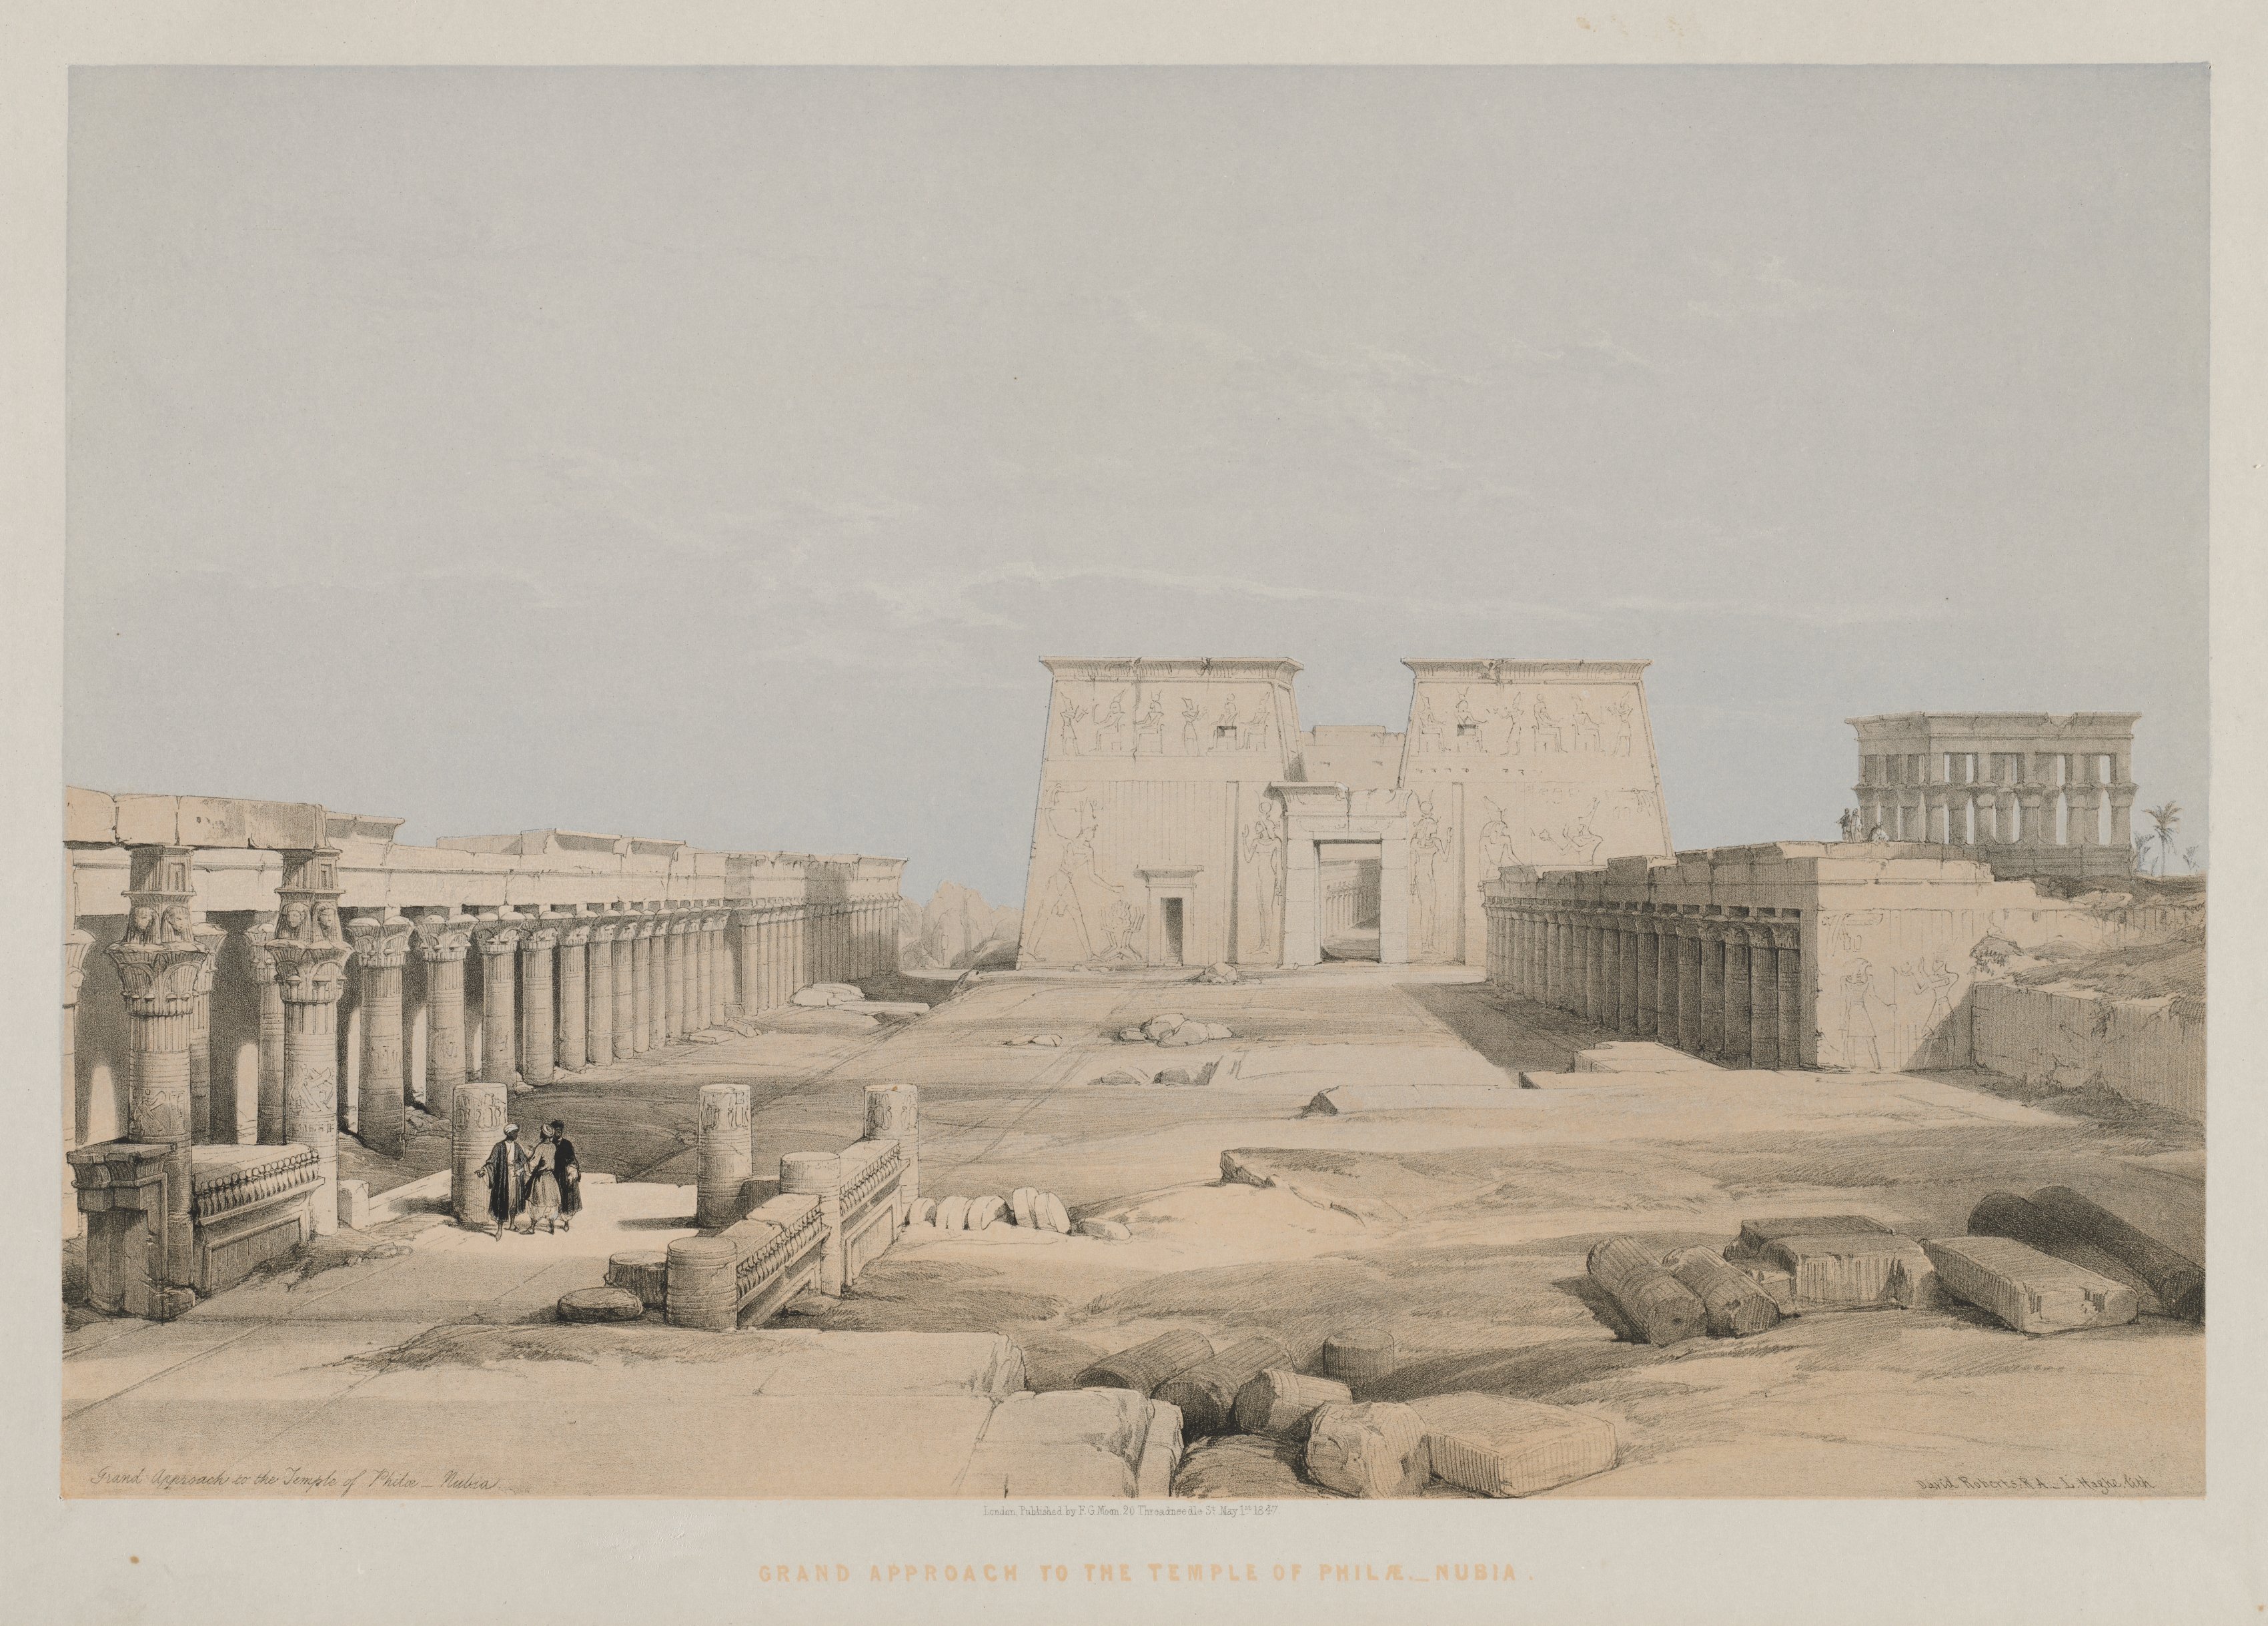 Egypt and Nubia, Volume I: Grand Approach to the Temple of Philae, Nubia